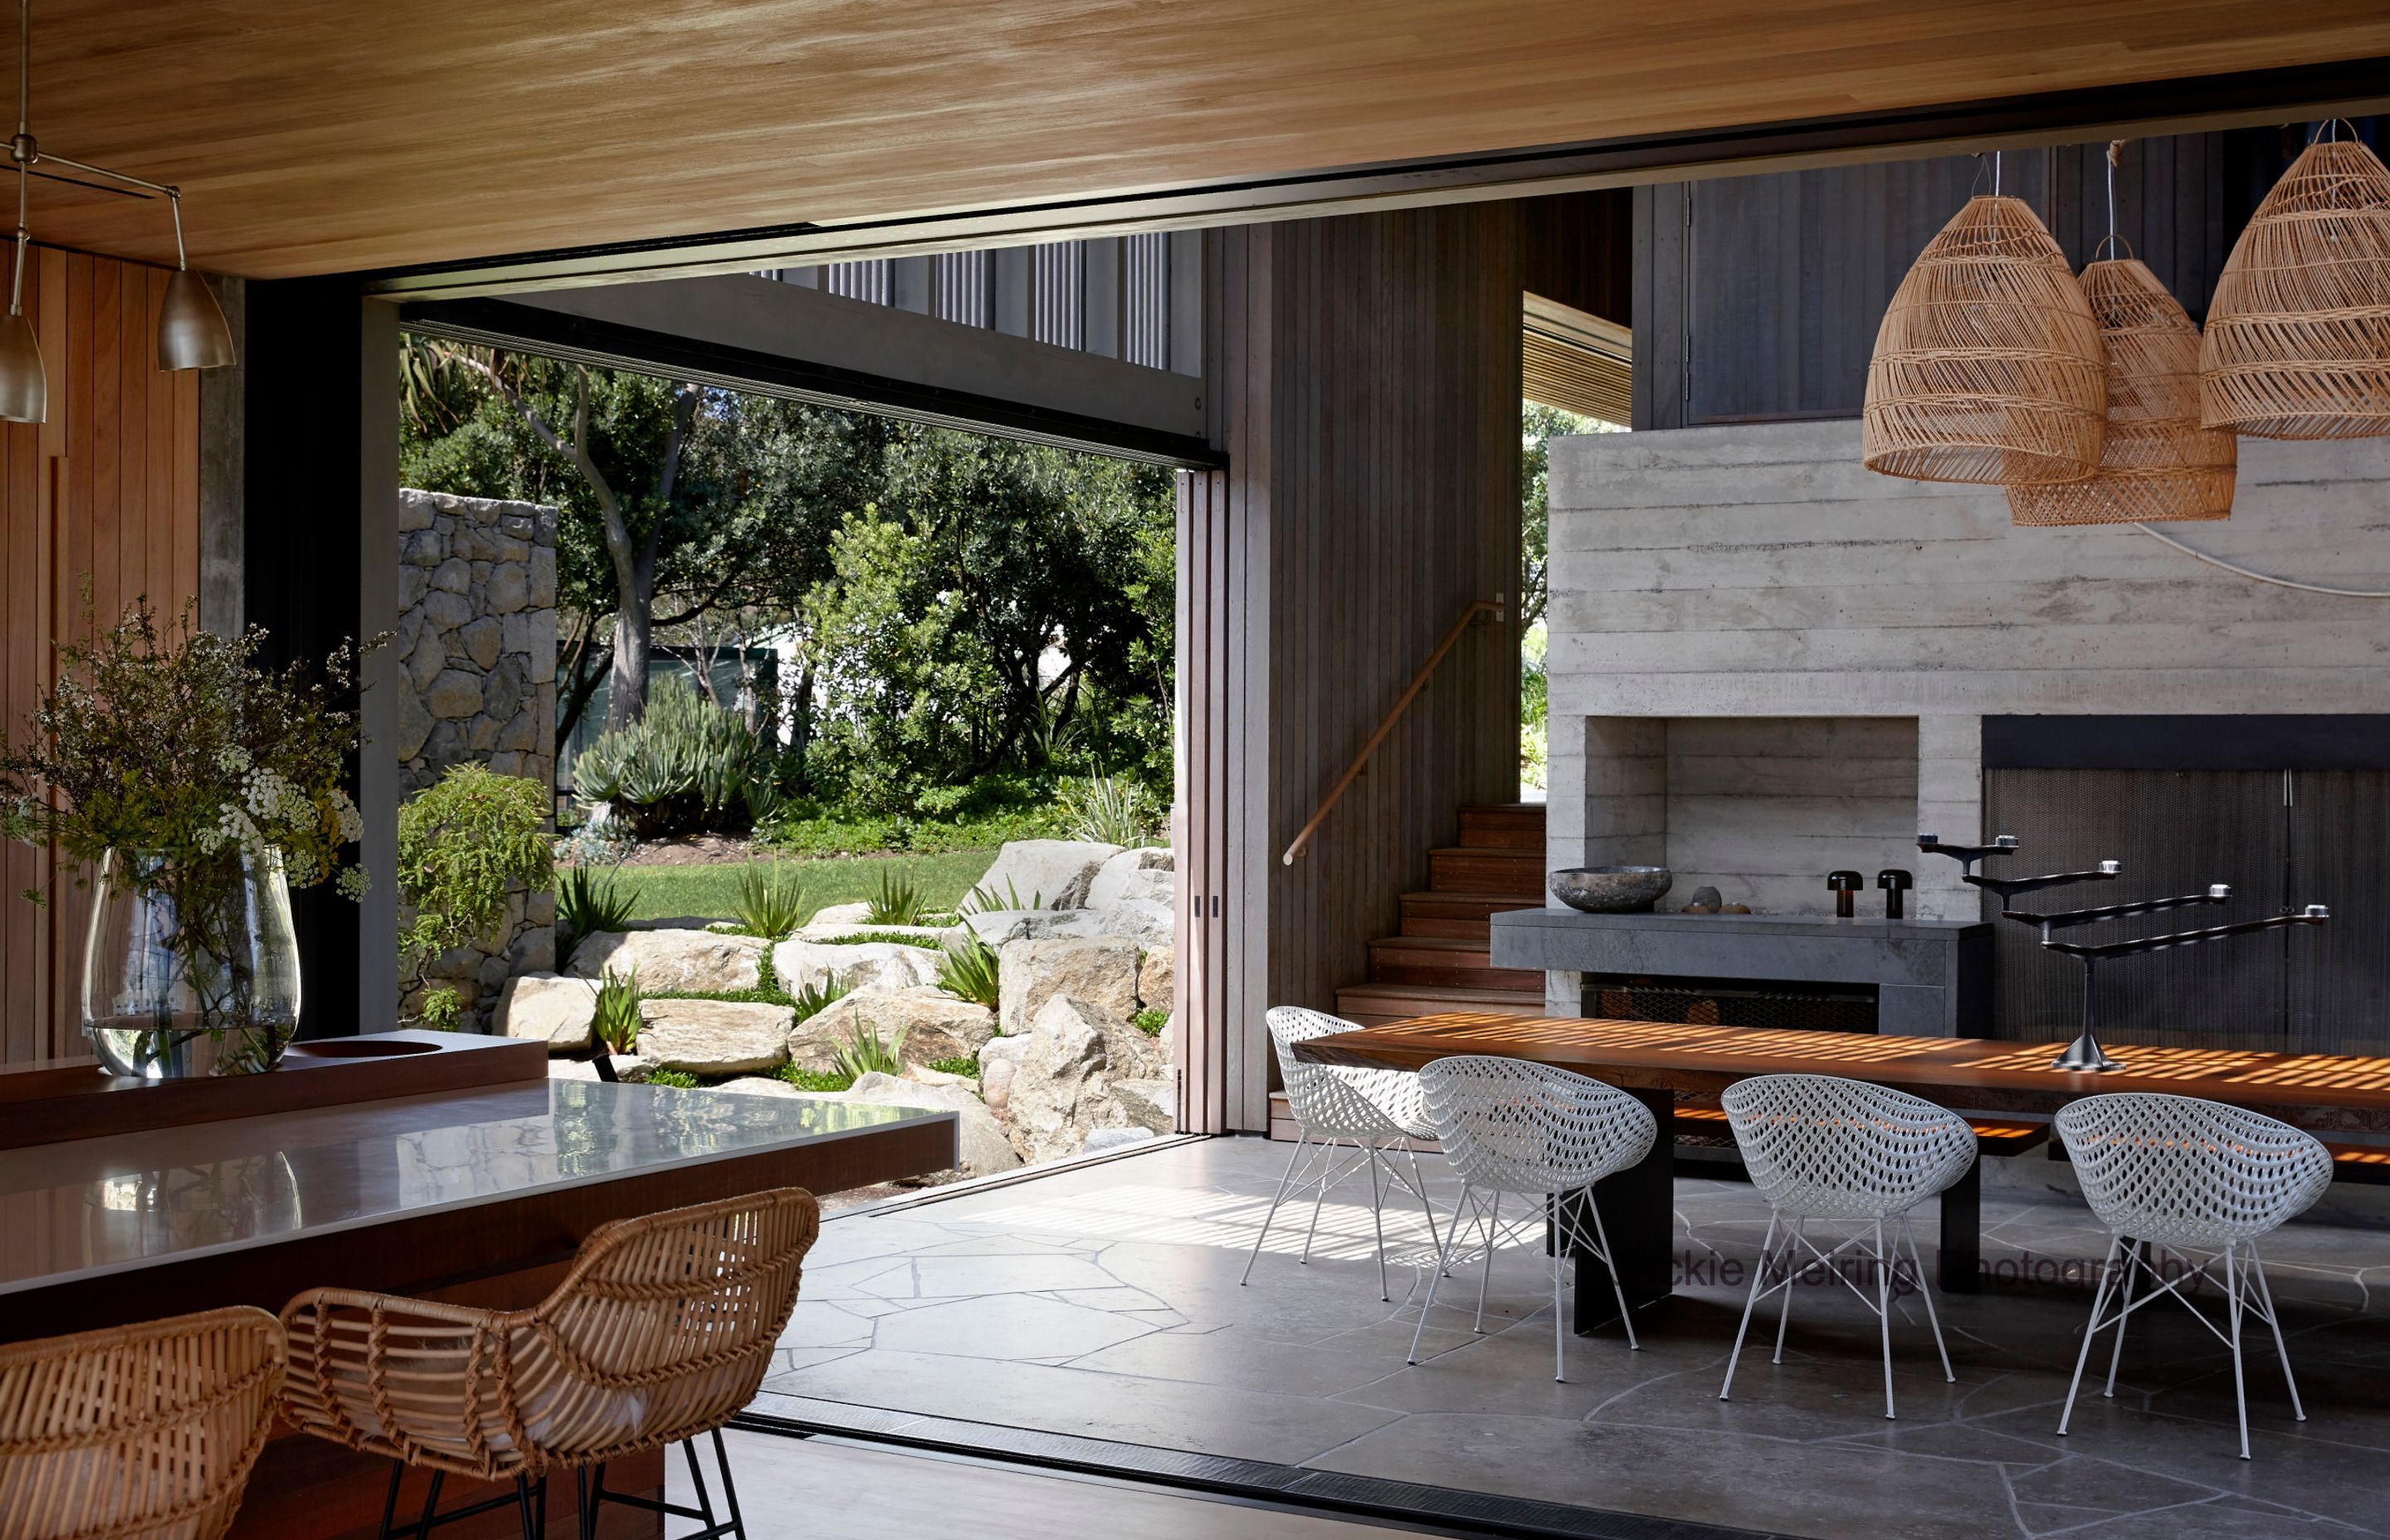 Indoor and outdoor spaces connect in this Awana Bay garden featuring raupo taranga nestled amongst local rock. Photo: Jackie Meiring